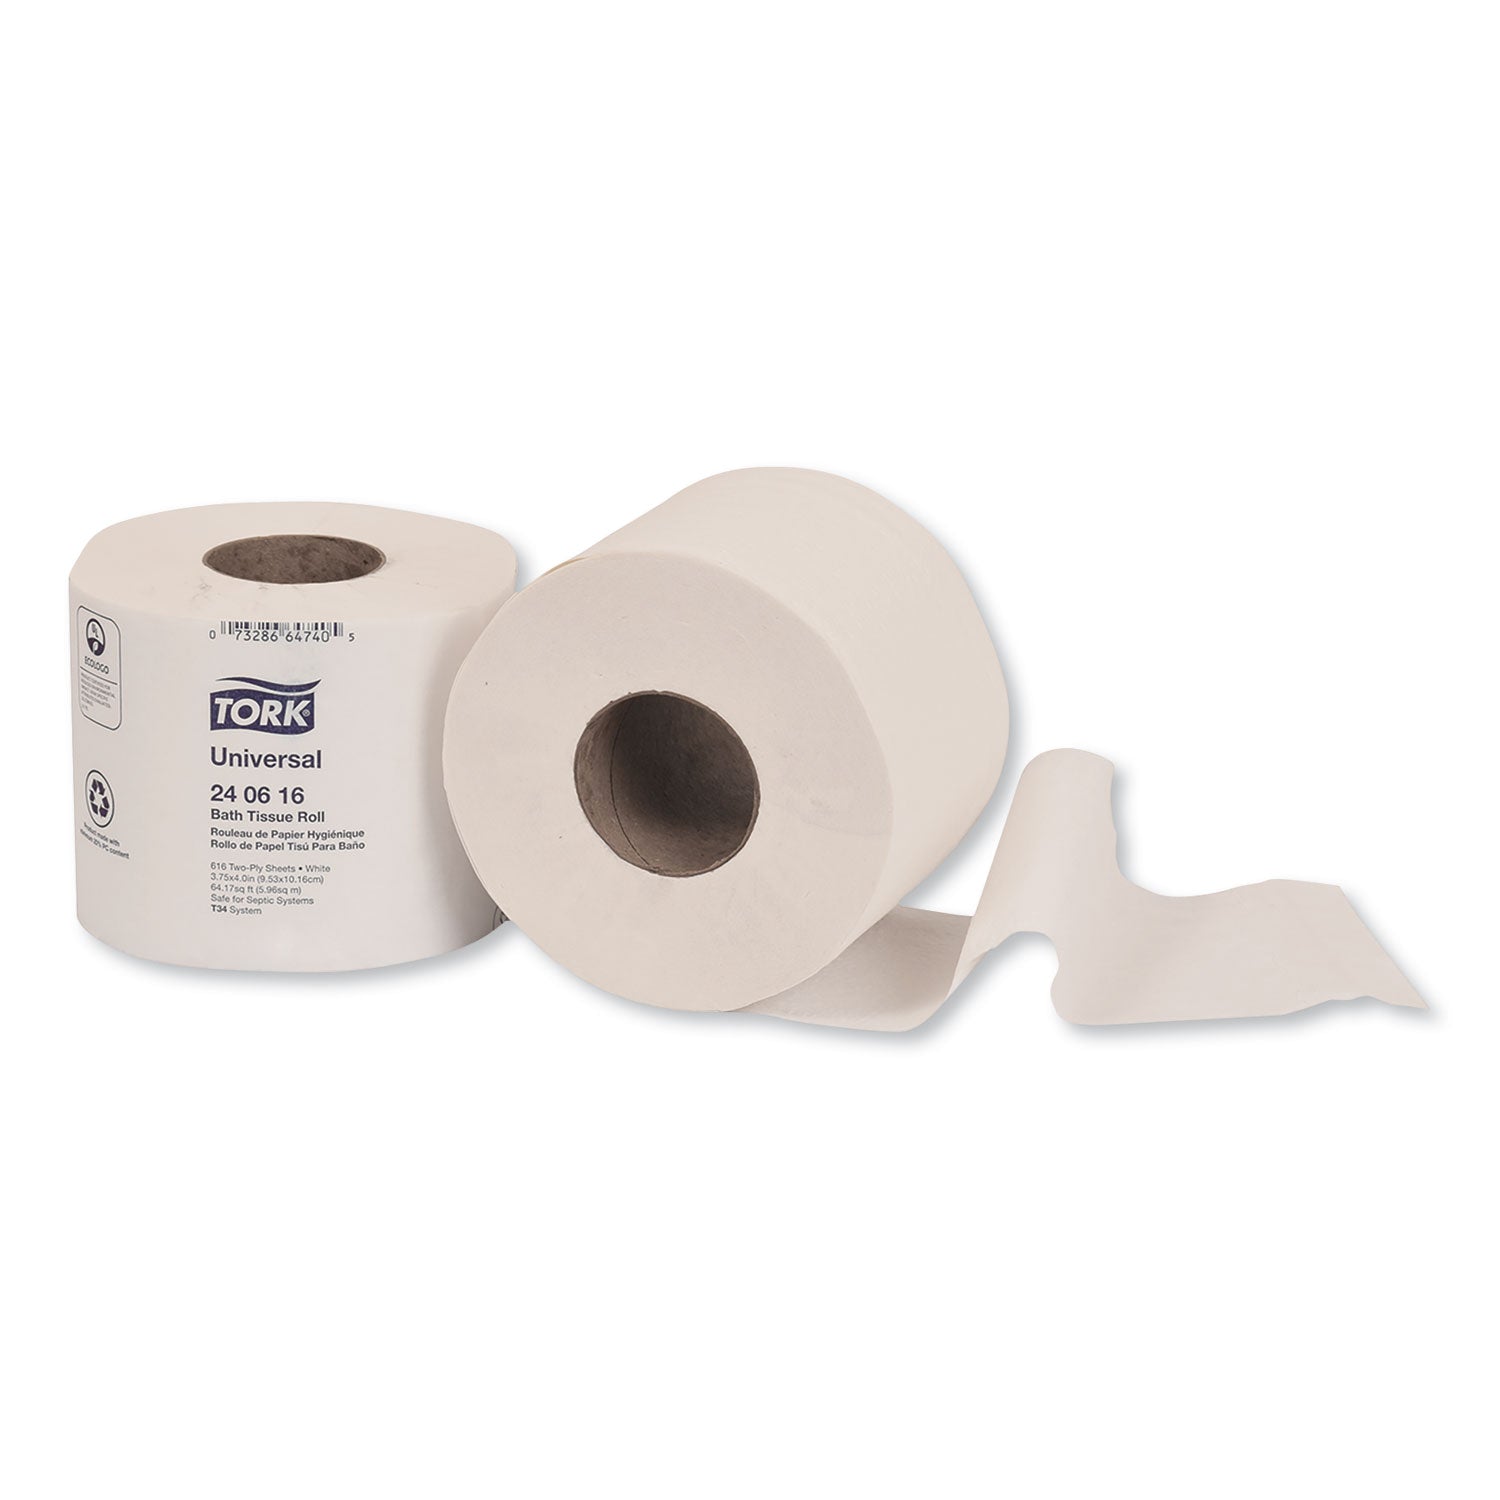 bath-tissue-septic-safe-2-ply-white-616-sheets-roll-48-rolls-carton_trk240616 - 1